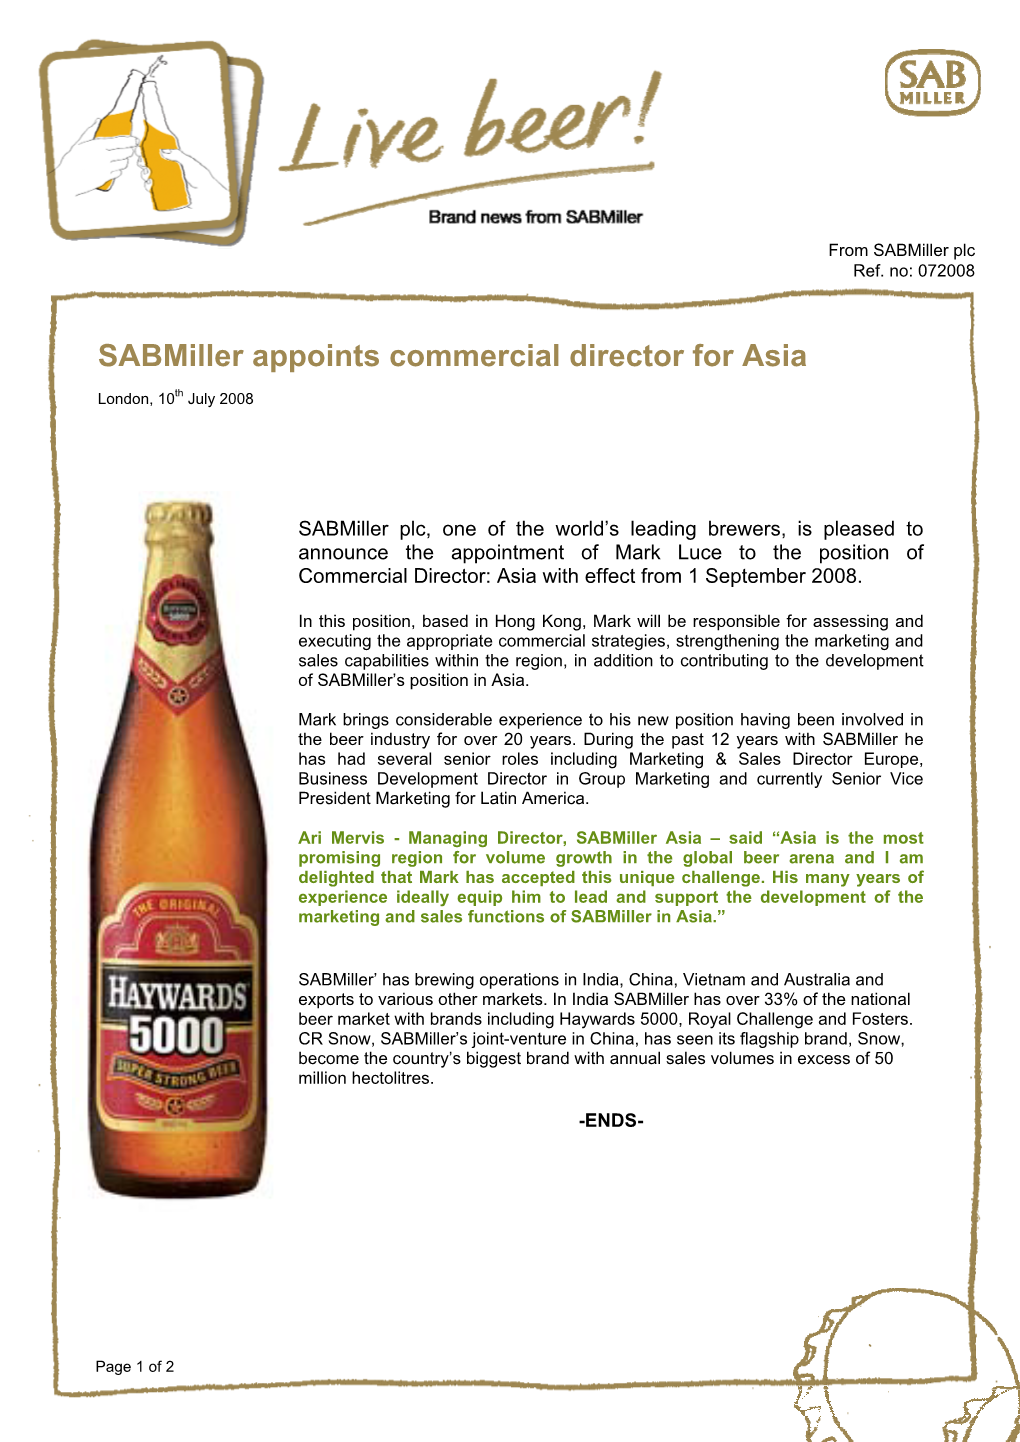 Sabmiller Appoints Commercial Director for Asia